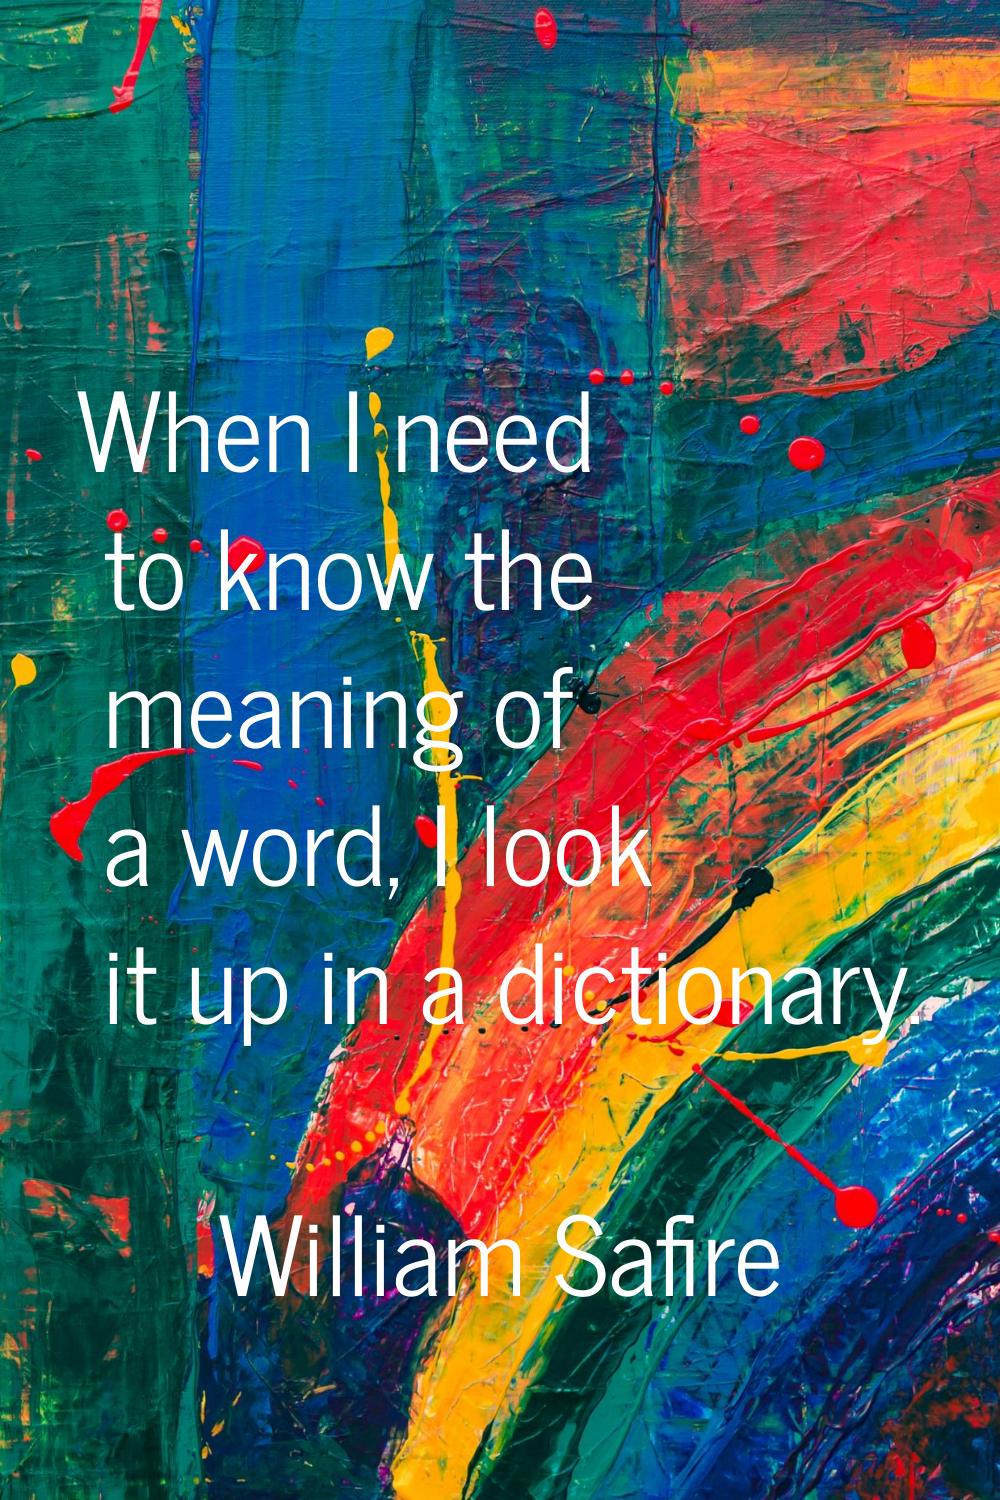 When I need to know the meaning of a word, I look it up in a dictionary.